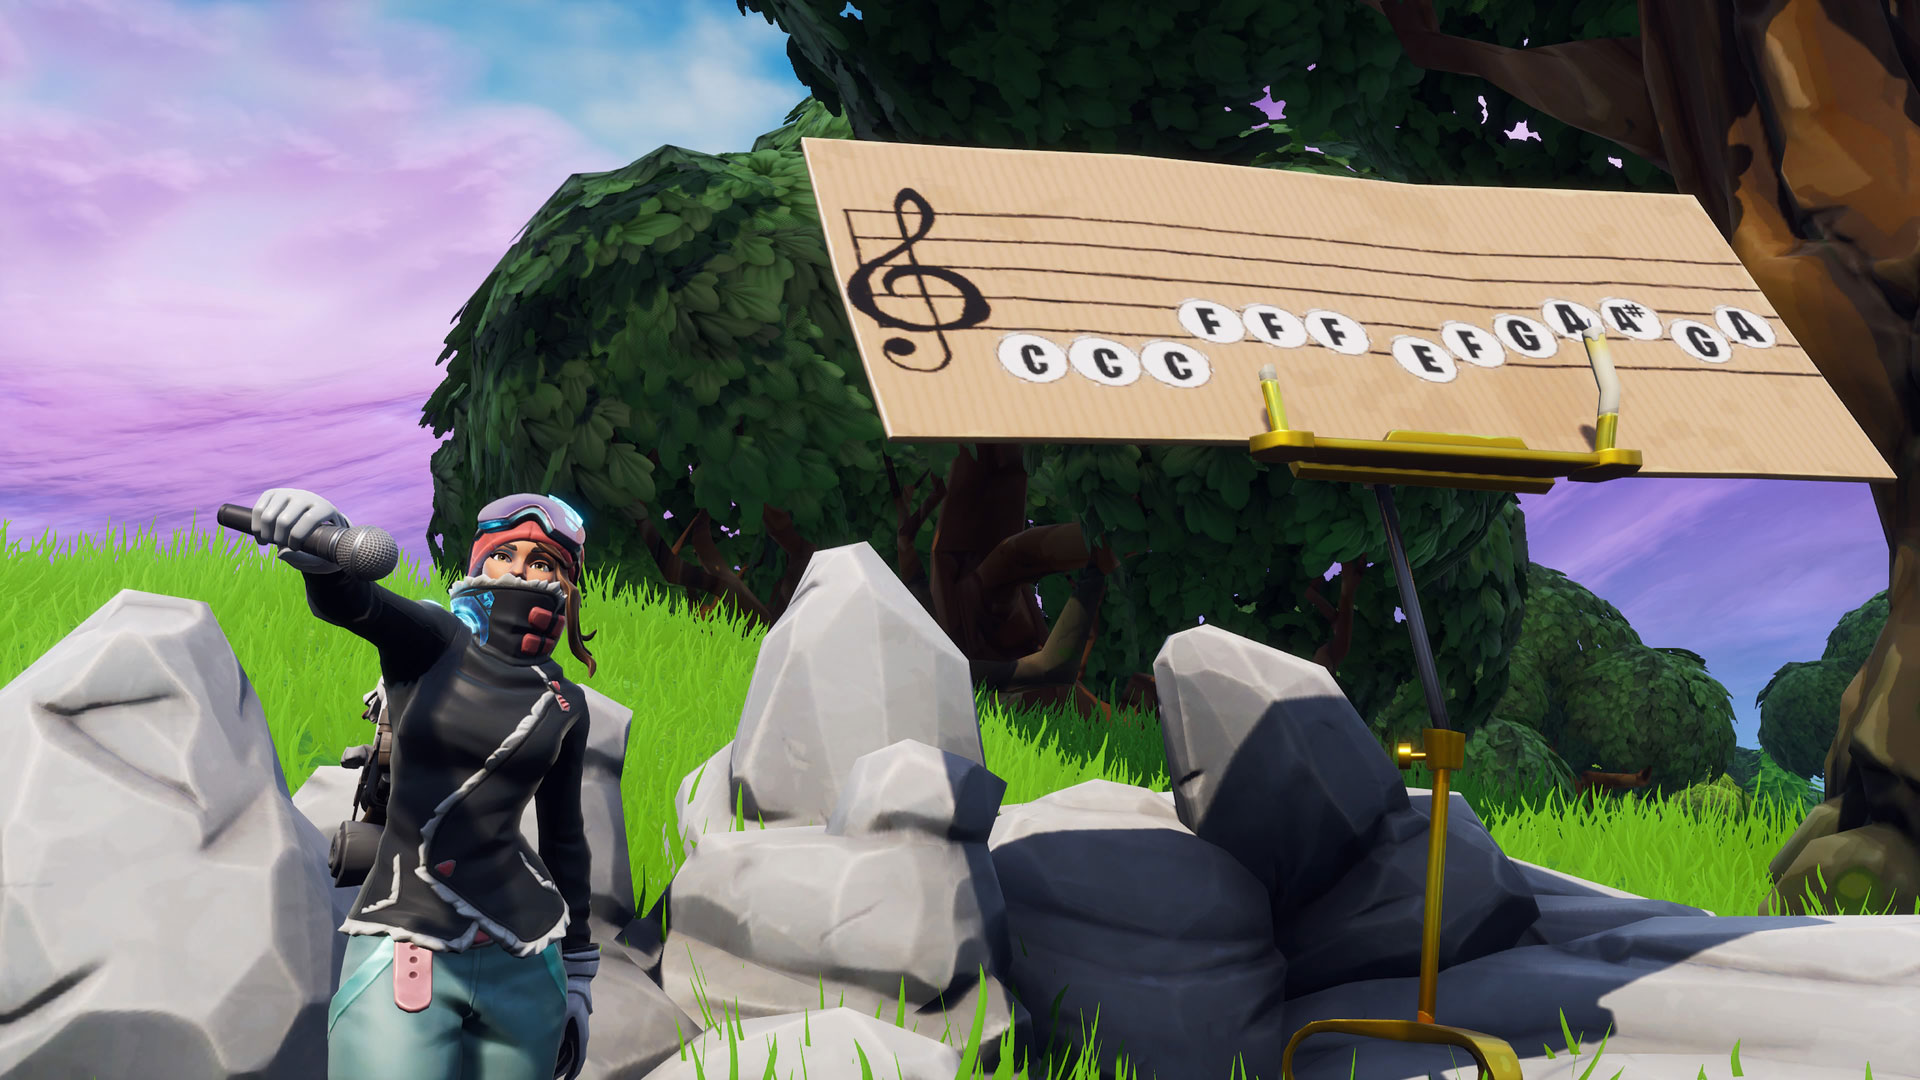 play the sheet music at the piano near pleasant park